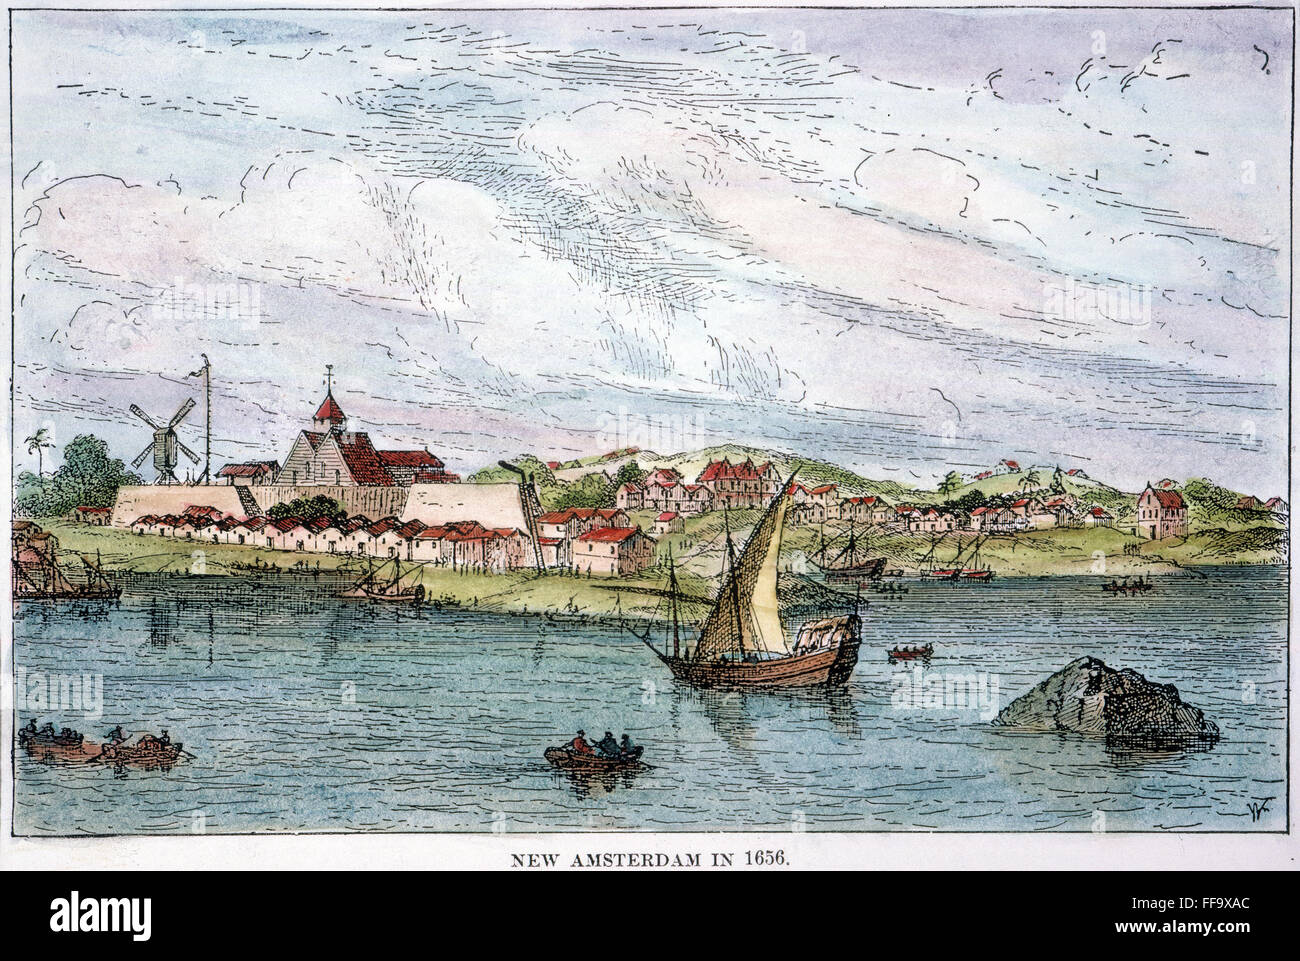 NEW AMSTERDAM, c1656. /nLine engraving, late 19th century. Stock Photo